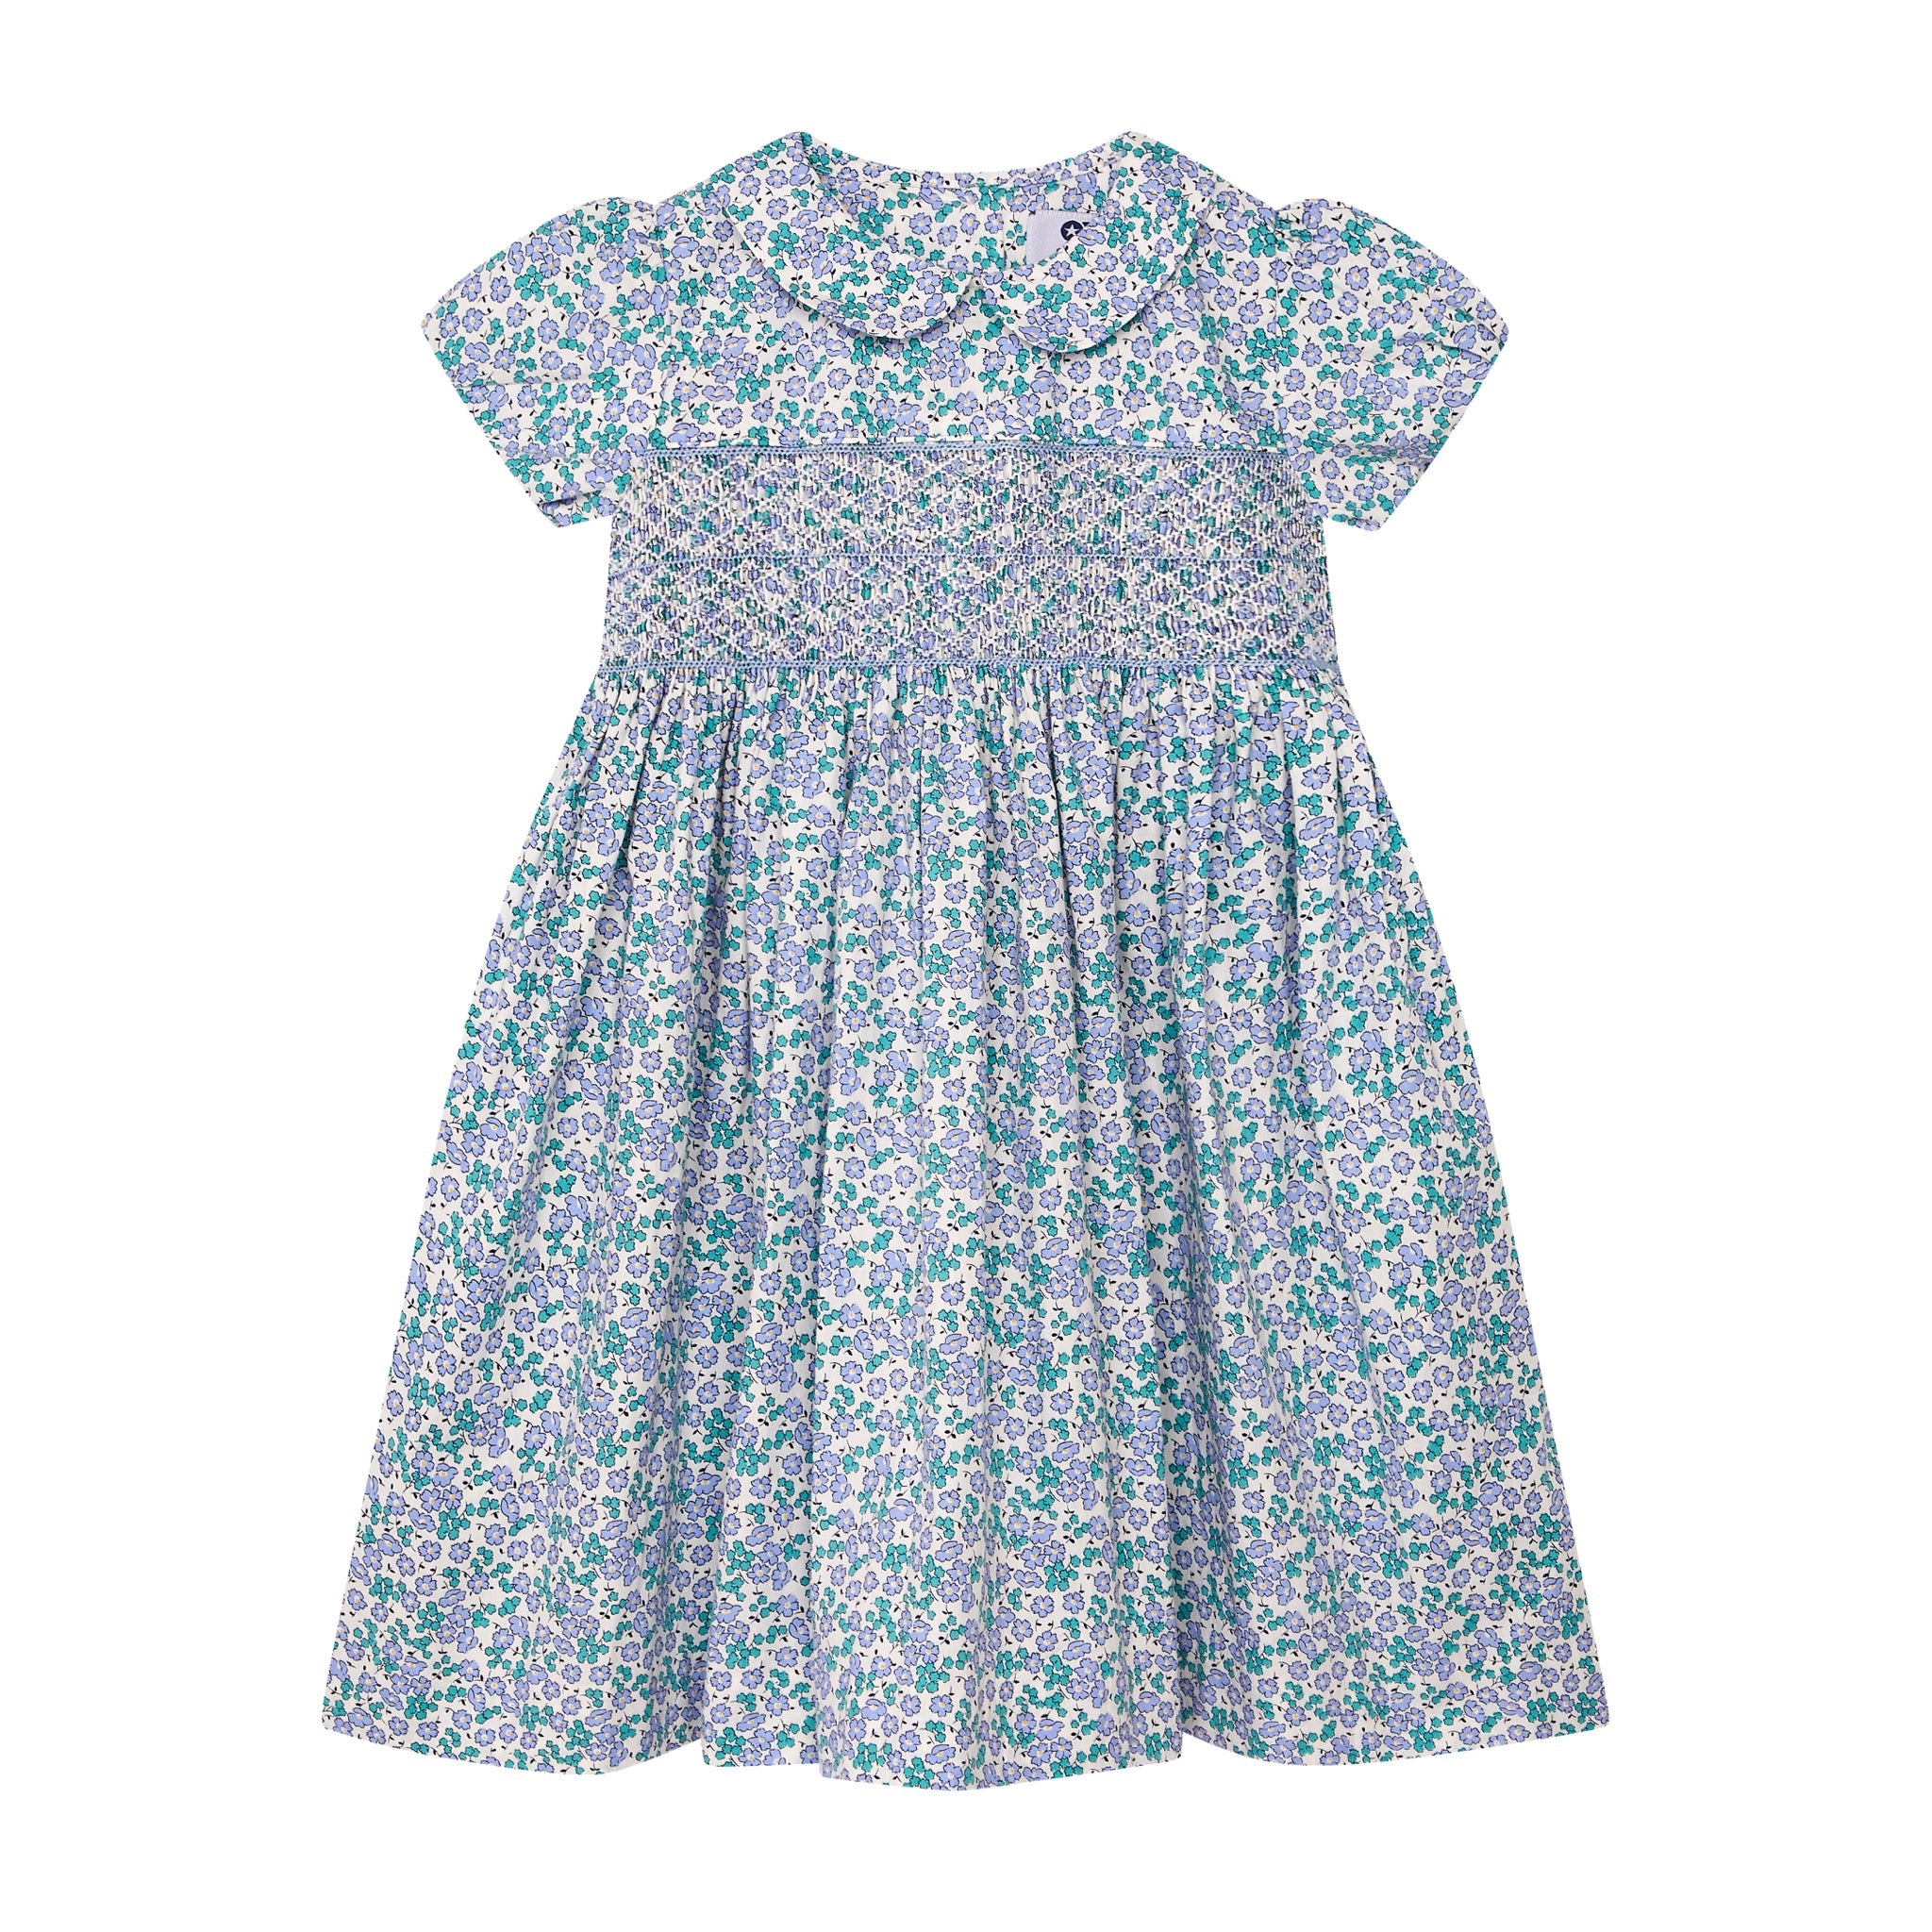 lilac blossom - Floral hand-smocked girls dress made from 100% cotton, back